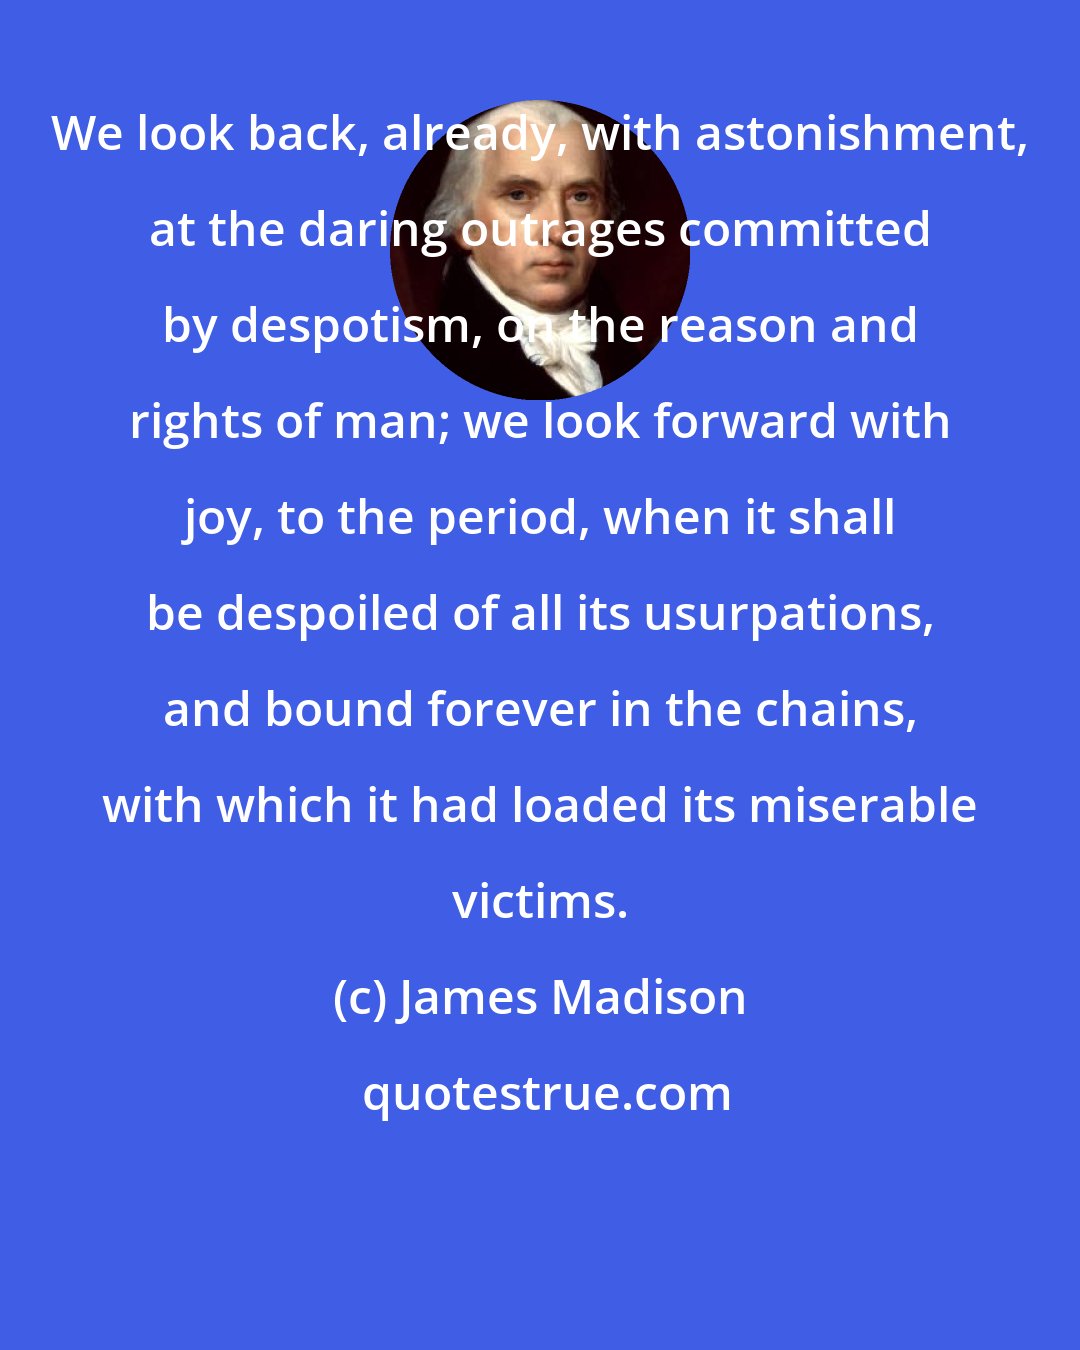 James Madison: We look back, already, with astonishment, at the daring outrages committed by despotism, on the reason and rights of man; we look forward with joy, to the period, when it shall be despoiled of all its usurpations, and bound forever in the chains, with which it had loaded its miserable victims.